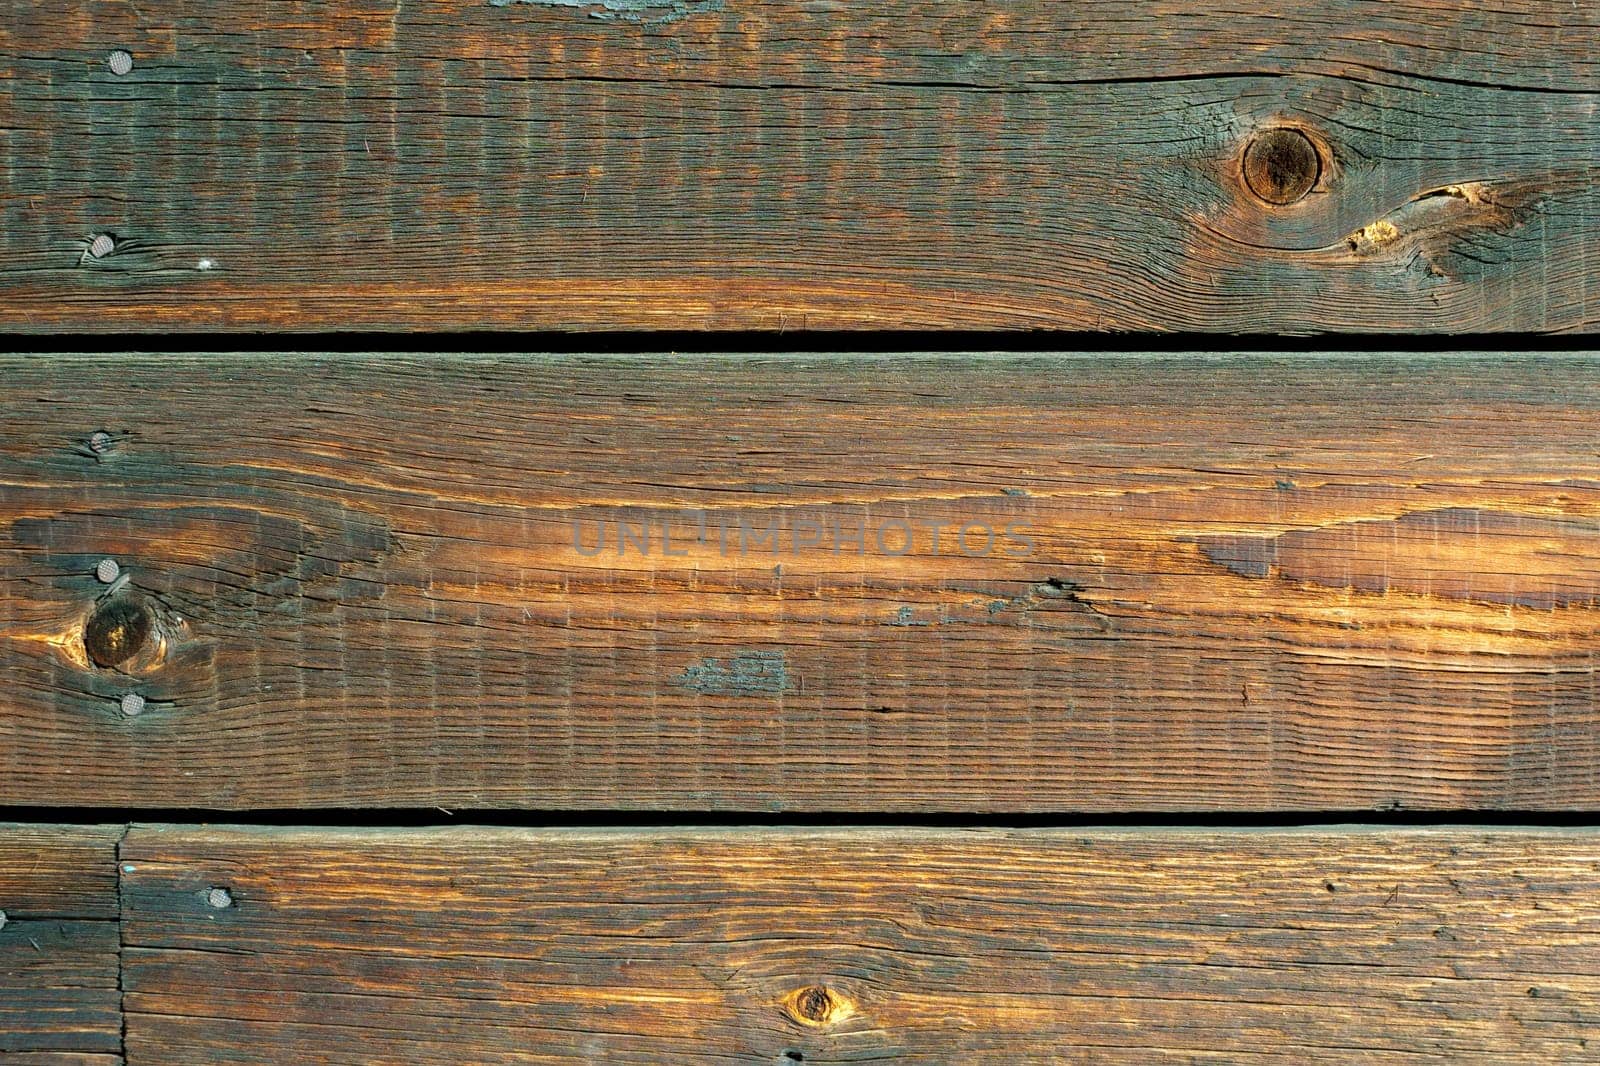 Wood texture, close-up wooden board, striped wood, old table by darksoul72